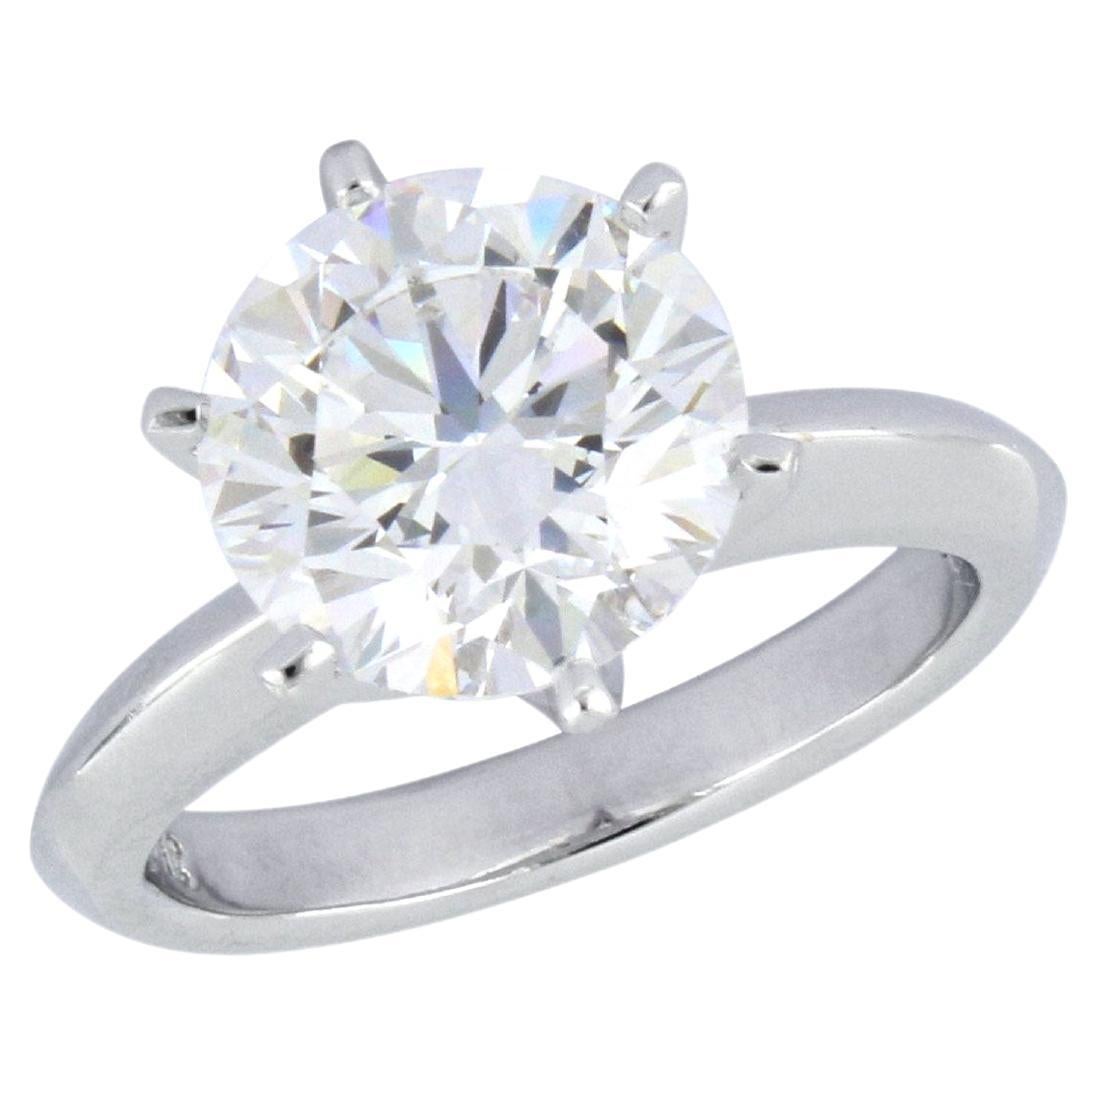 3.52 Carat Natural Diamond Ring in 18K White Gold For Sale